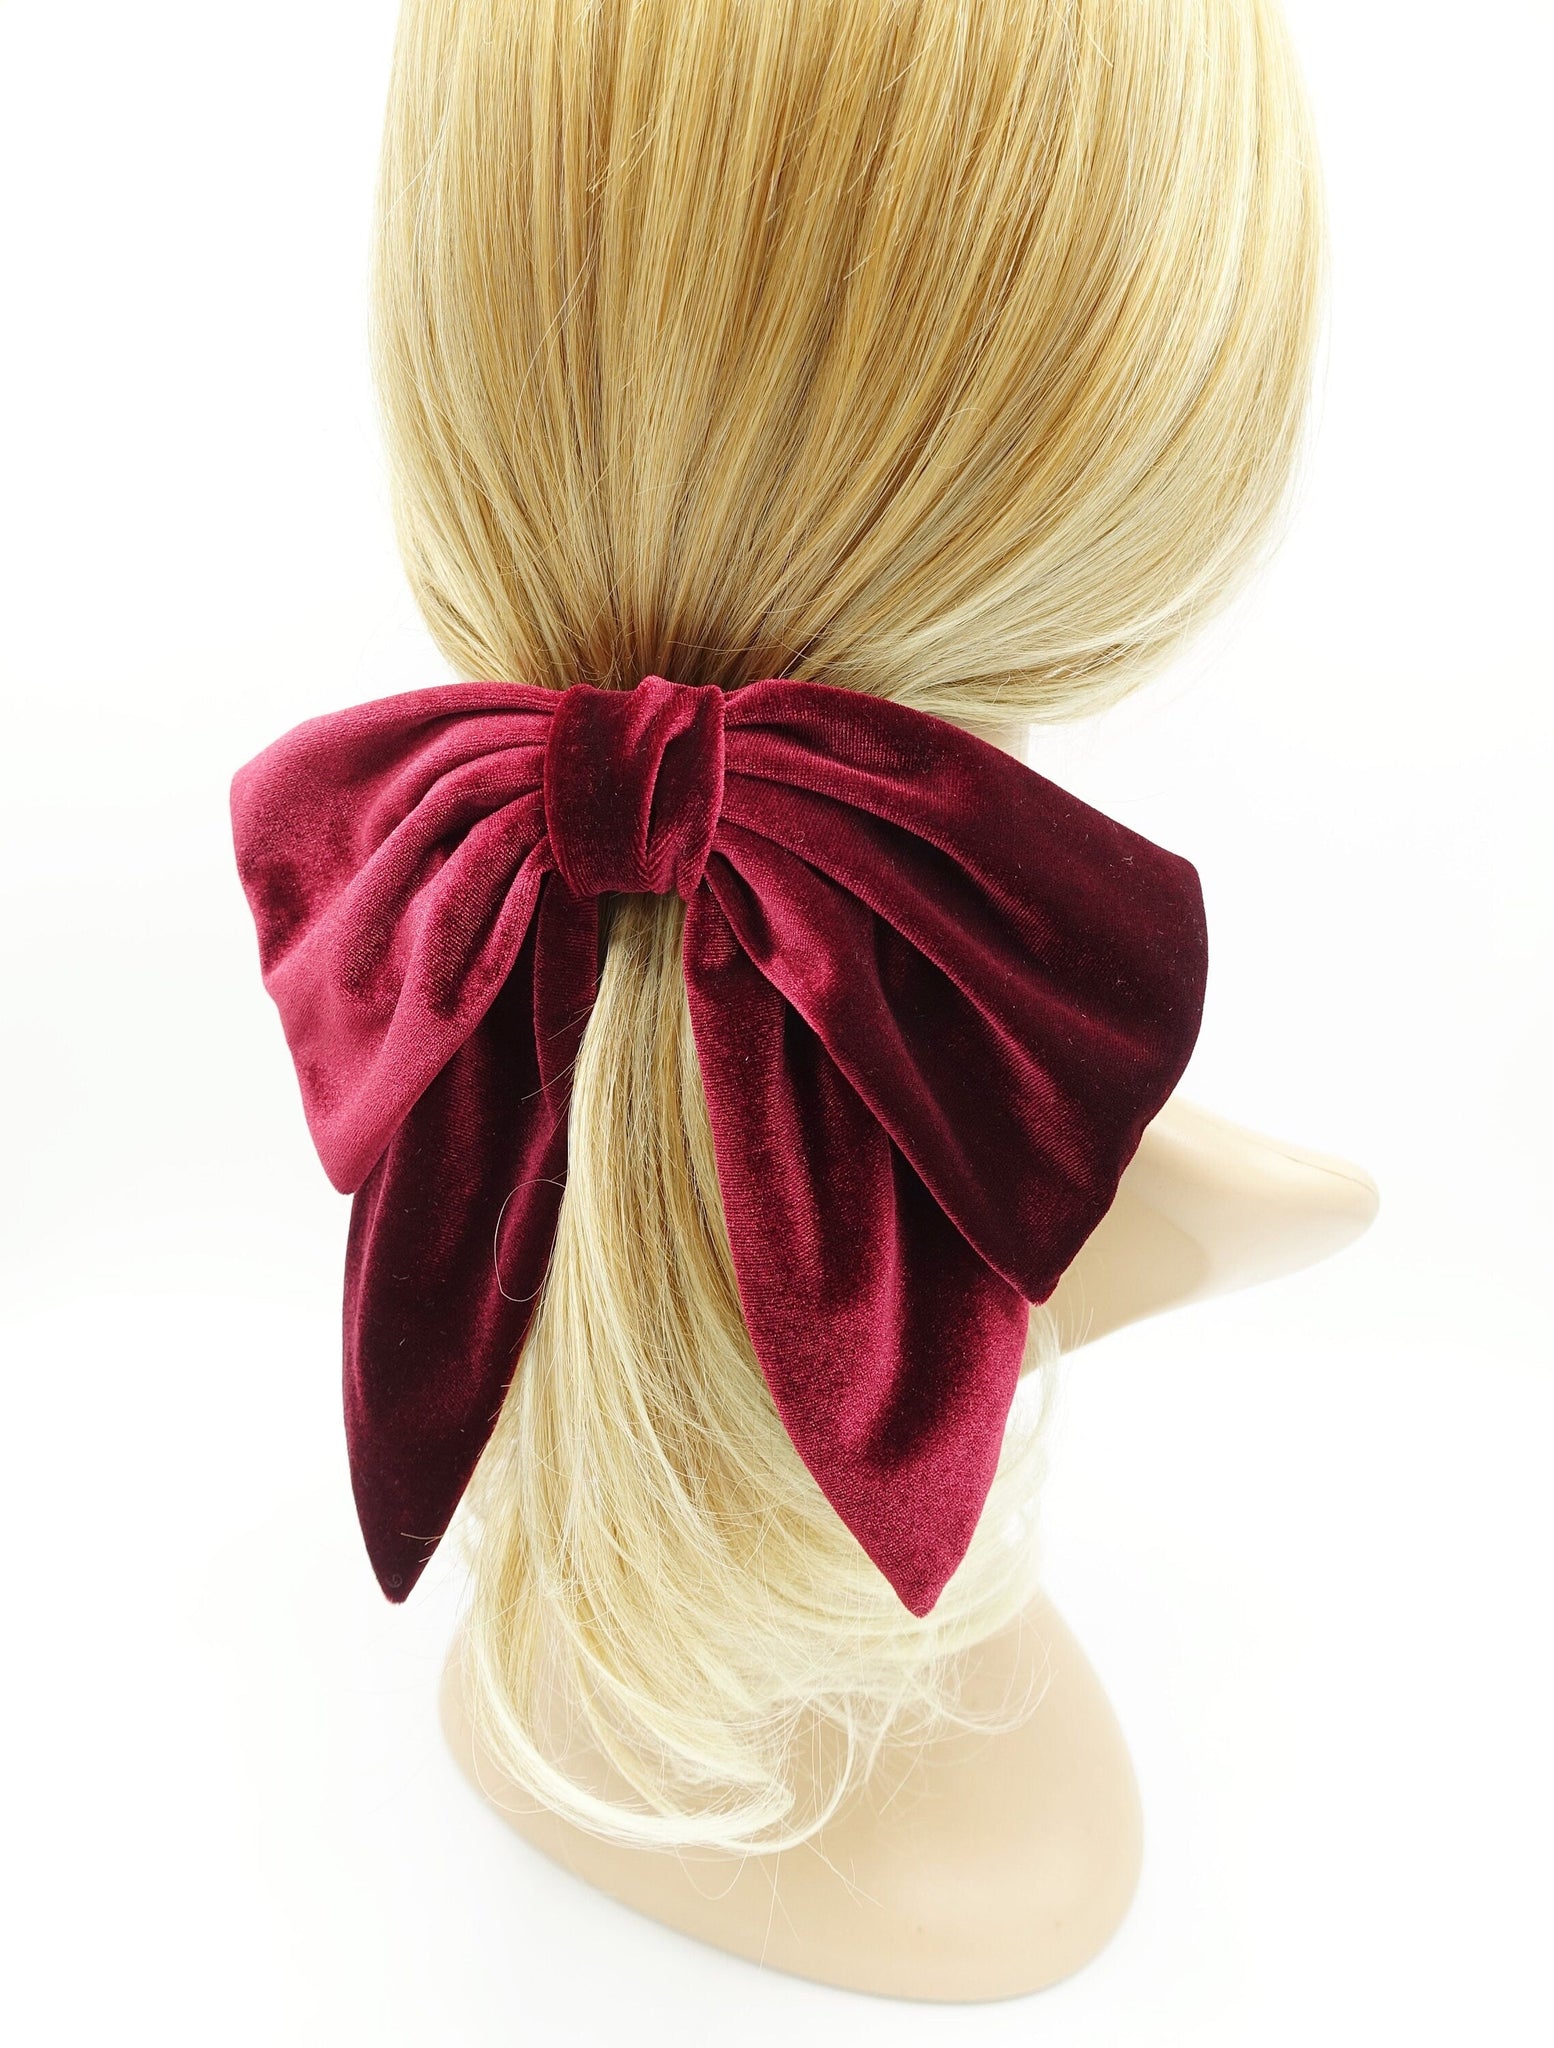 VeryShine Barrette (Bow) Red wine velvet hair bow pointed big bow stylish women hair accessory for women